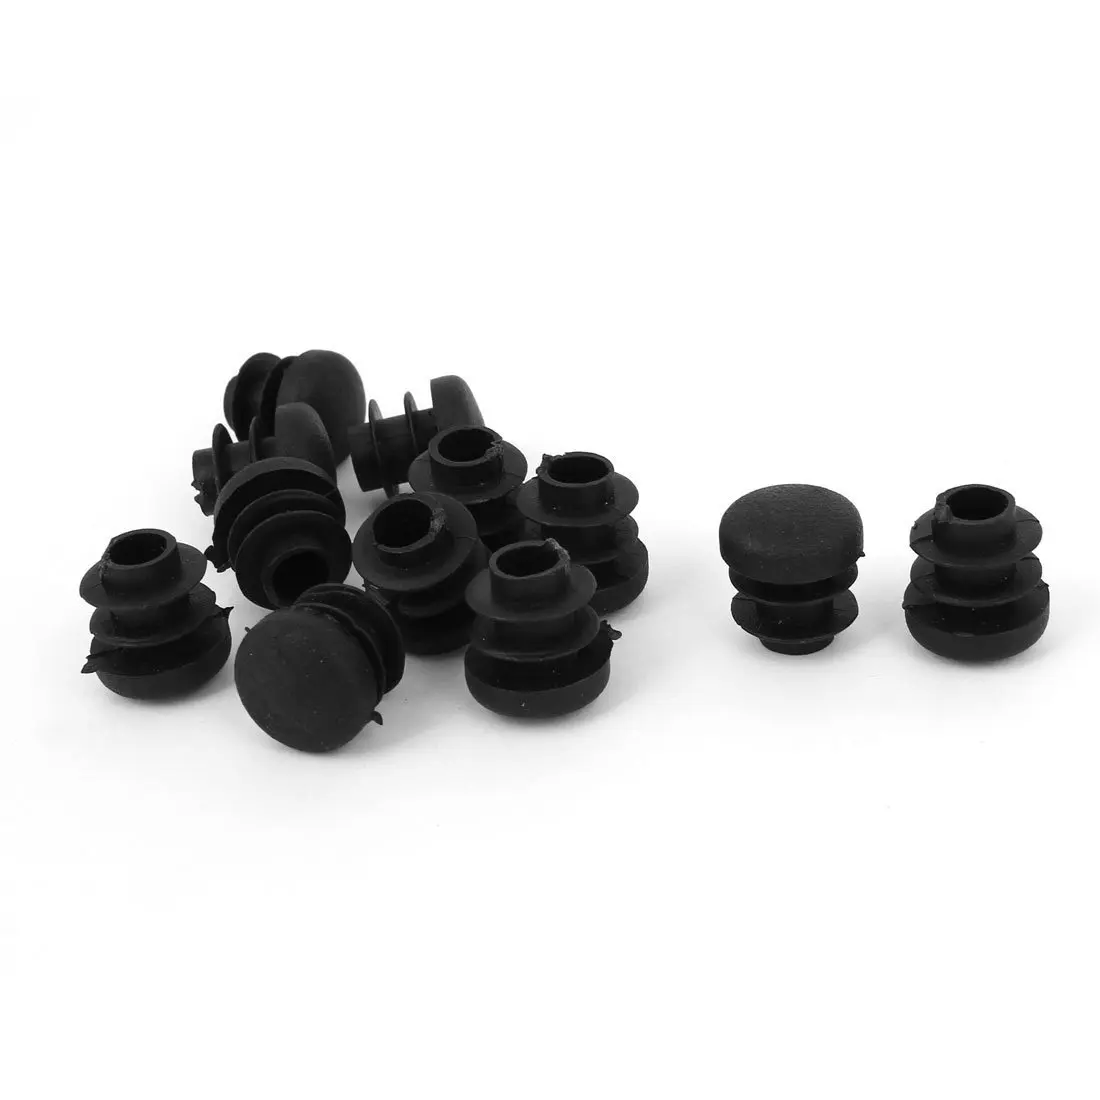 Hot Sale Chair Table Legs Plug 14mm Diameter Round Plastic Cover Thread Inserted Tube 12 PCS